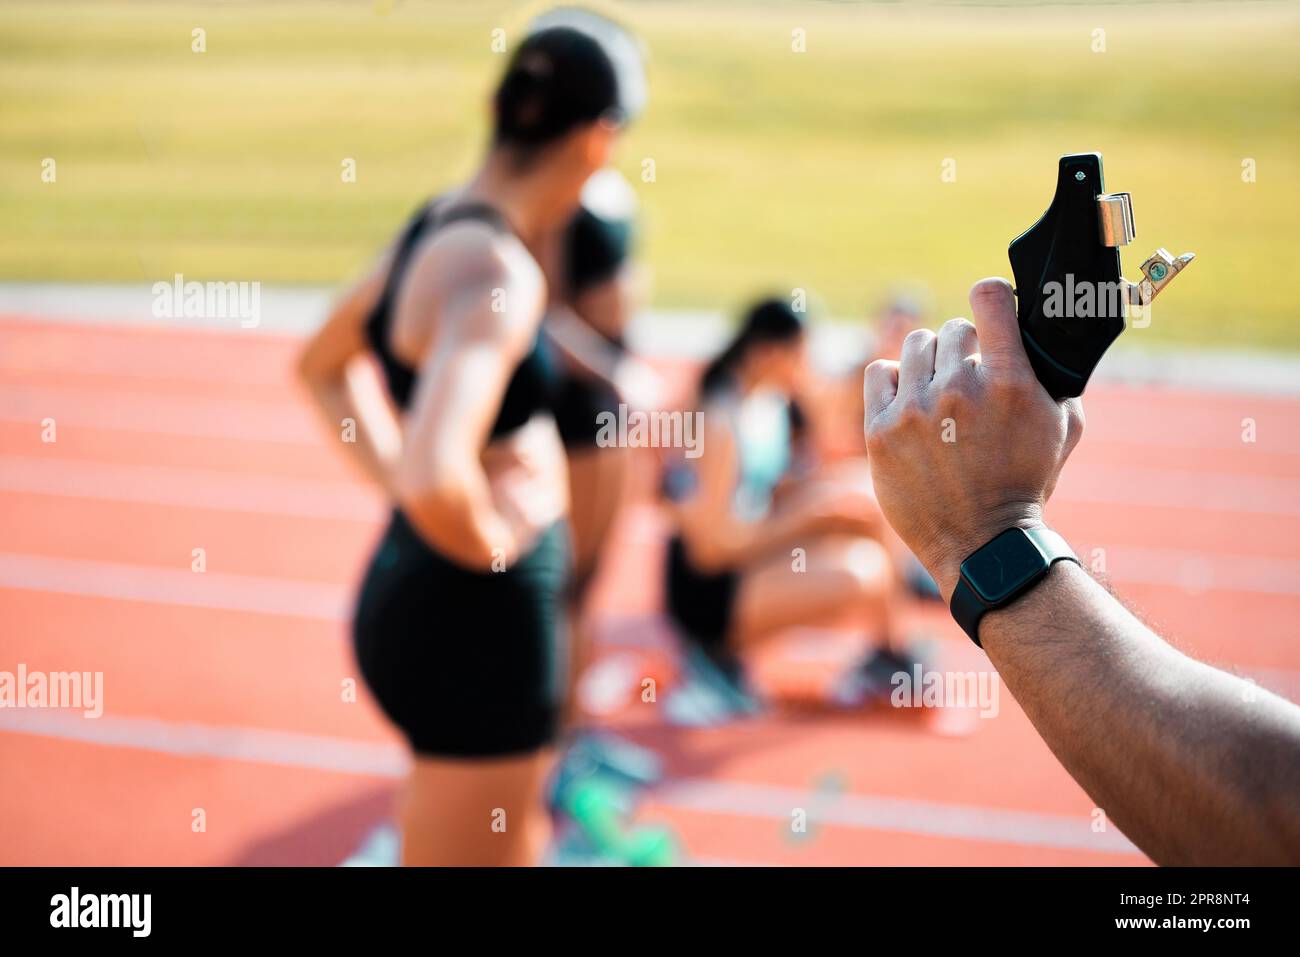 Trying to get them ready. Rearview shot of an unrecognizable man holding a starting gun while a group of sportswomen take up their positions on track. Stock Photo